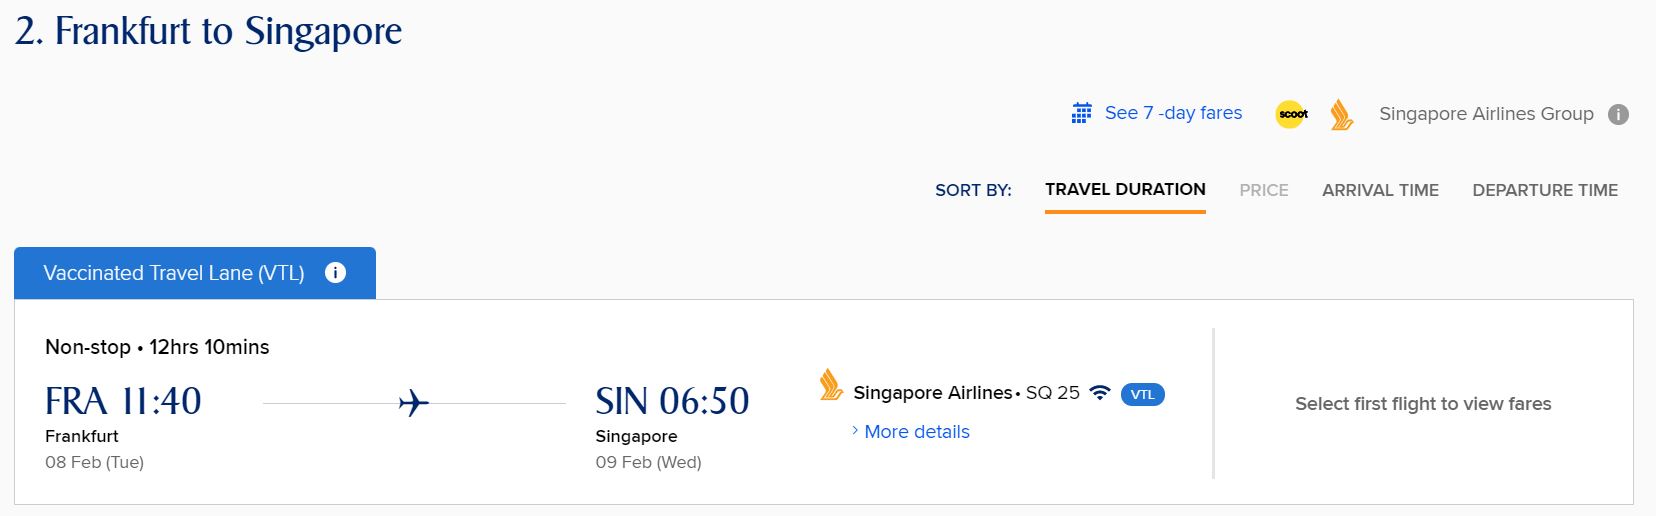 SIA Tickets Germany to Singapore Cost VTL